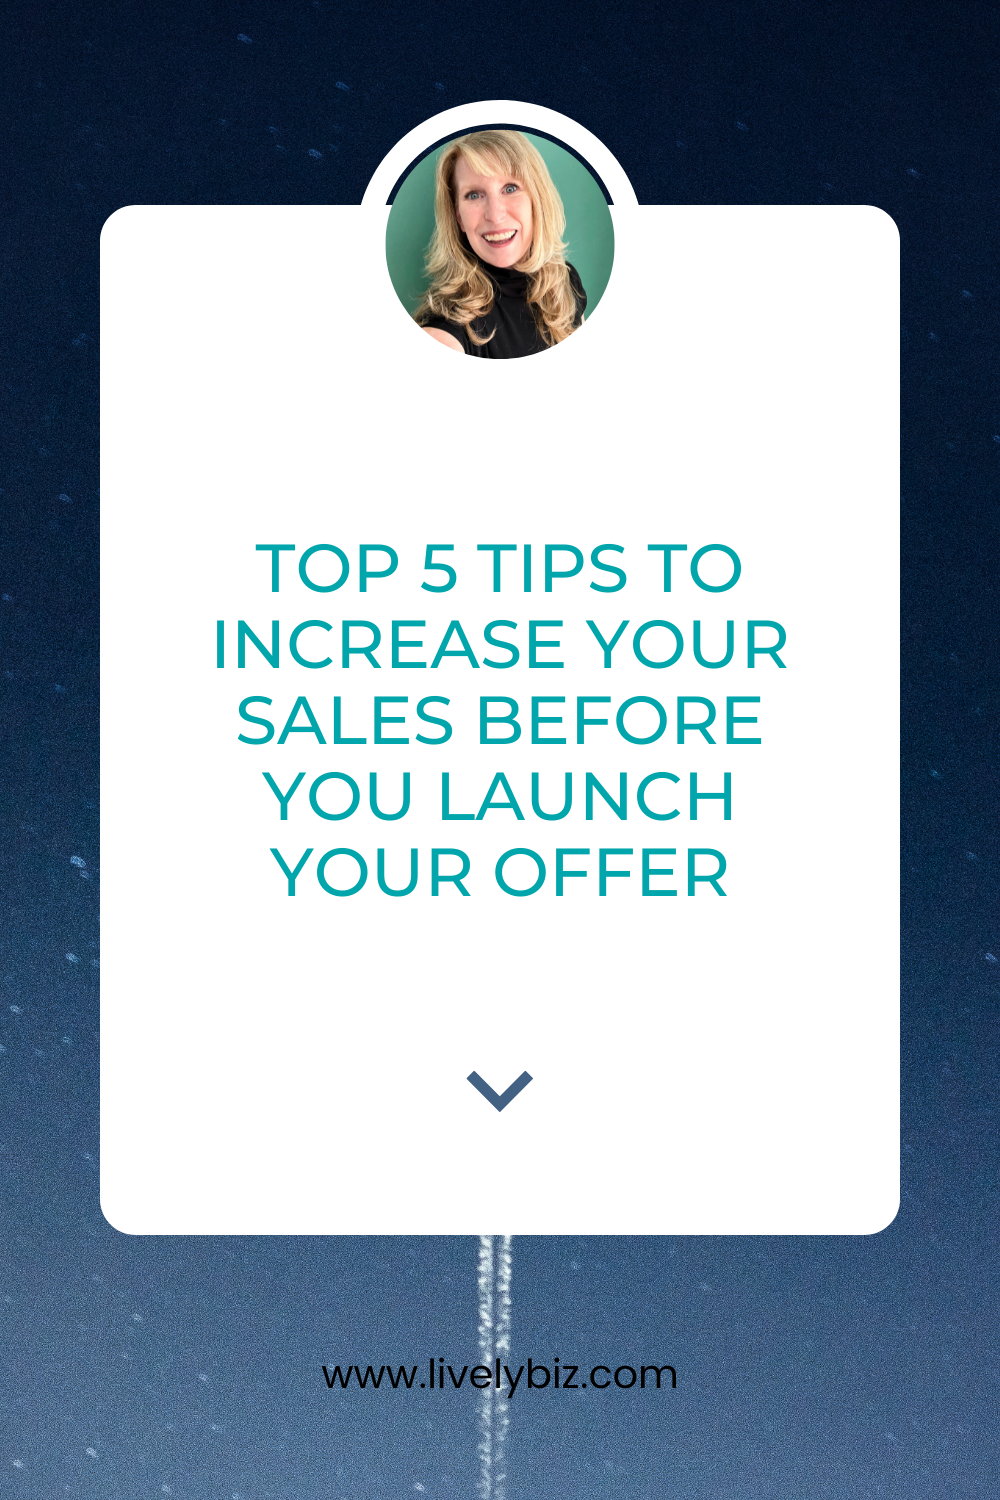 Top 5 Tips to Increase Your Sales Before Your Launch